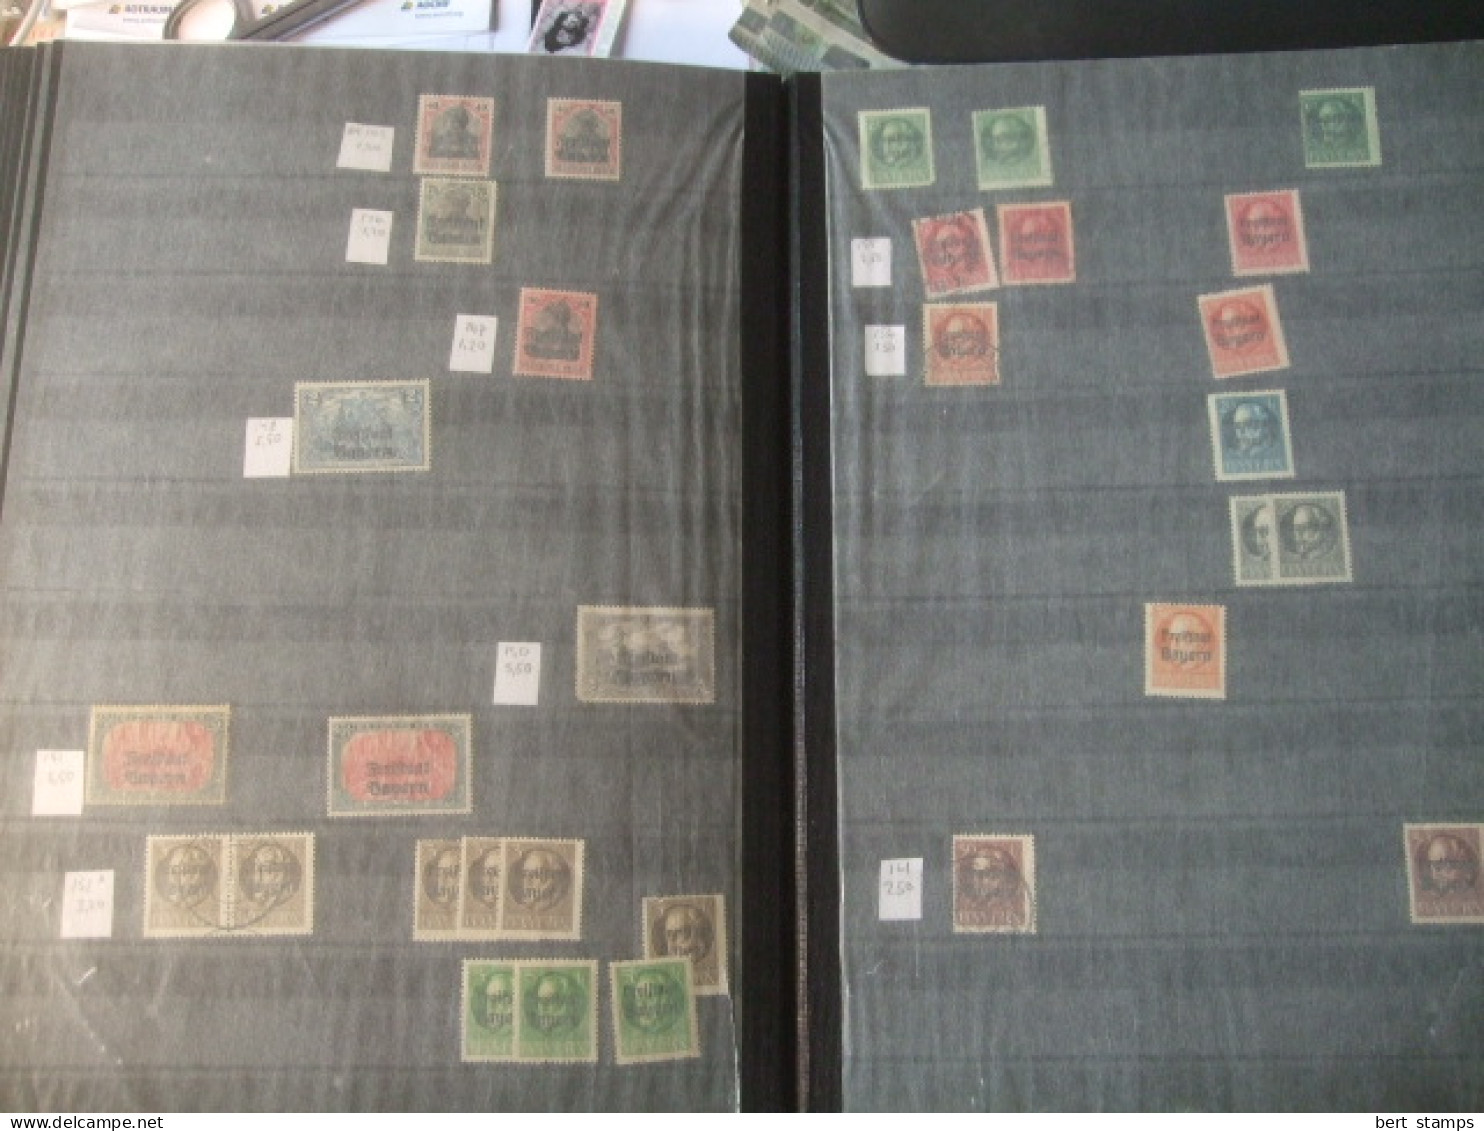 Stockbook. With old Germany, Baden, Bayern, Wurttemburg in price reduced  154,90 to 132,20